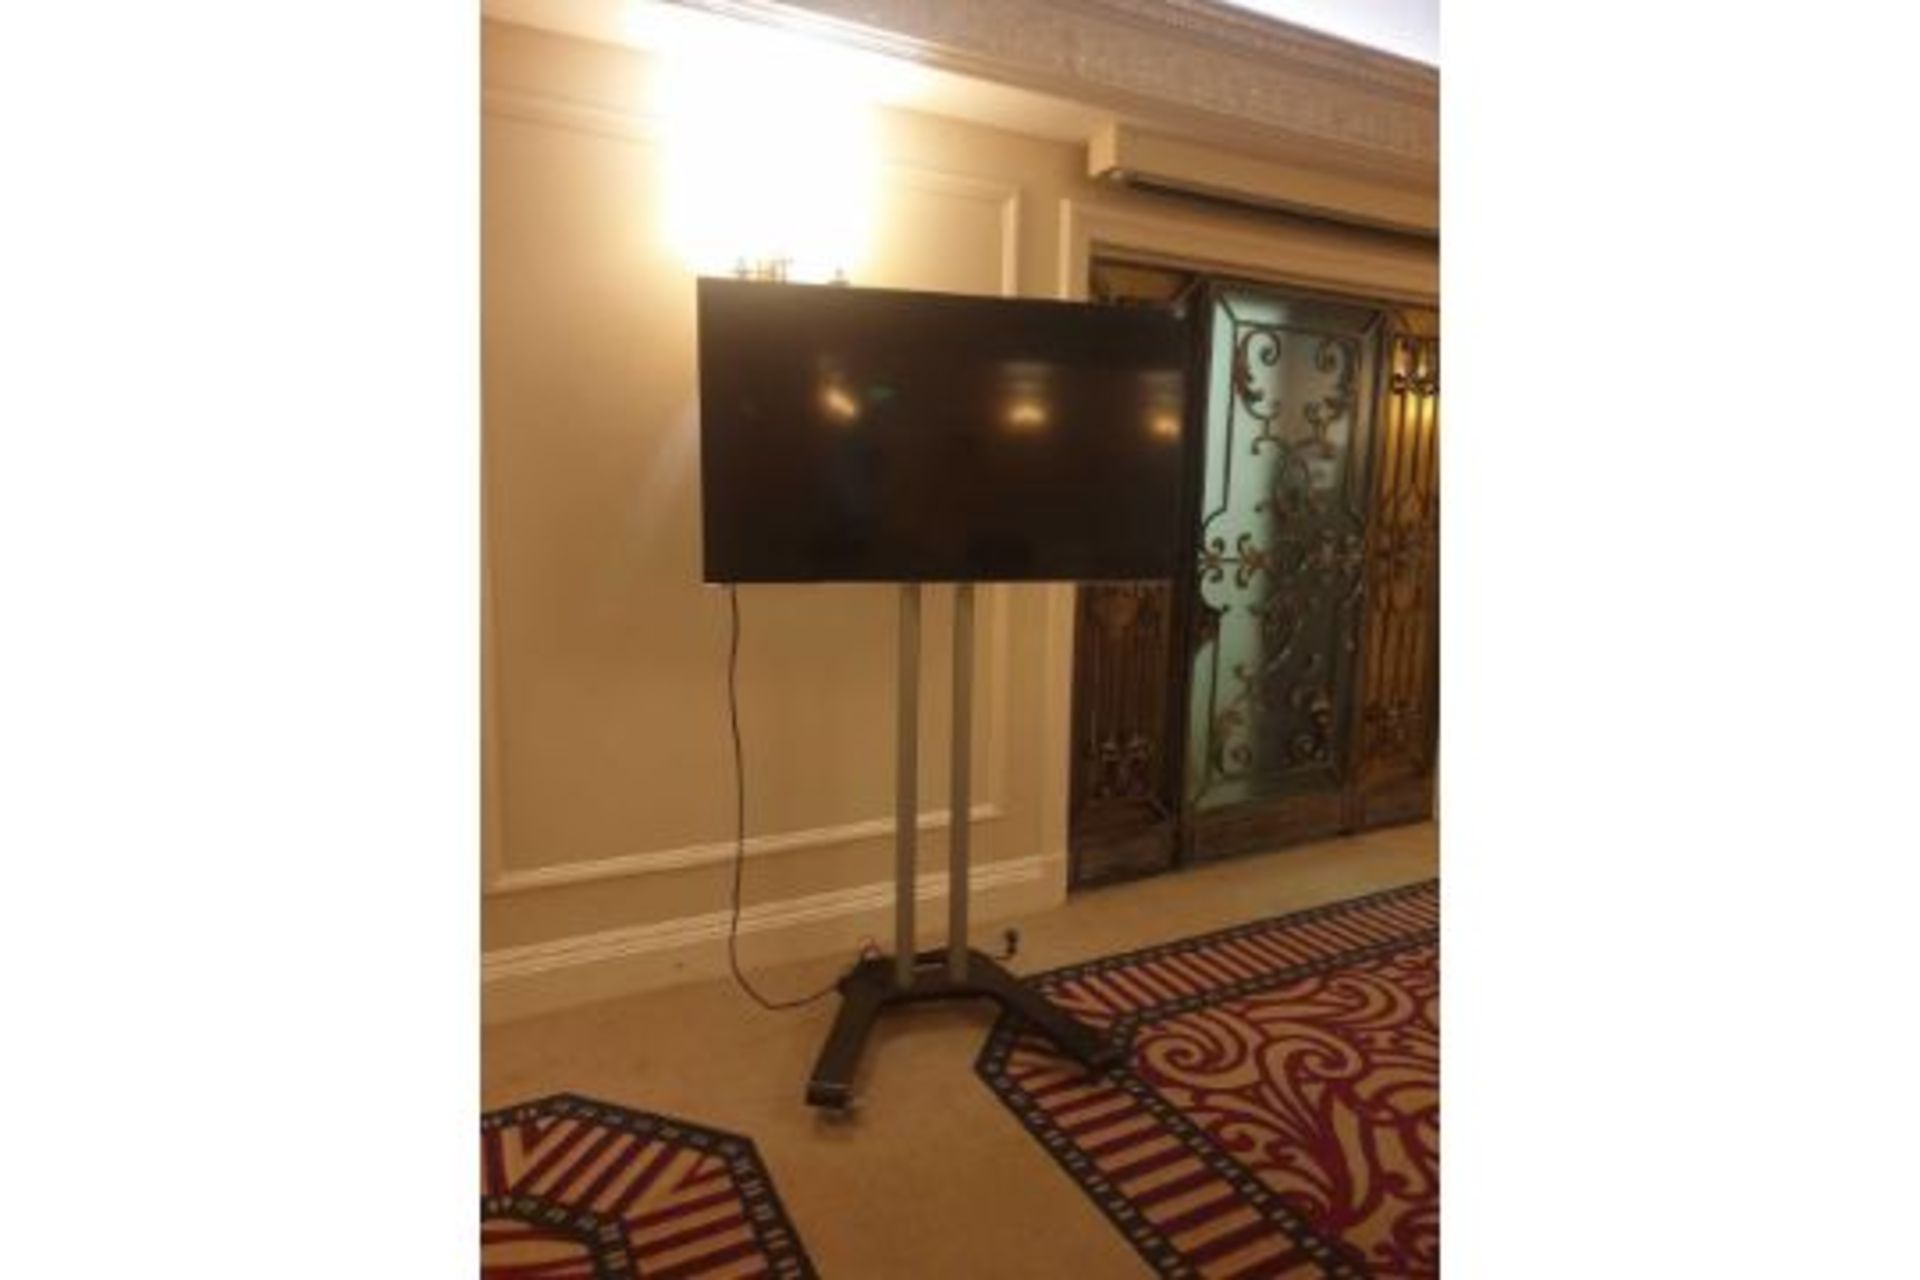 Mobile stand for large monitor / TV capacity to 50"